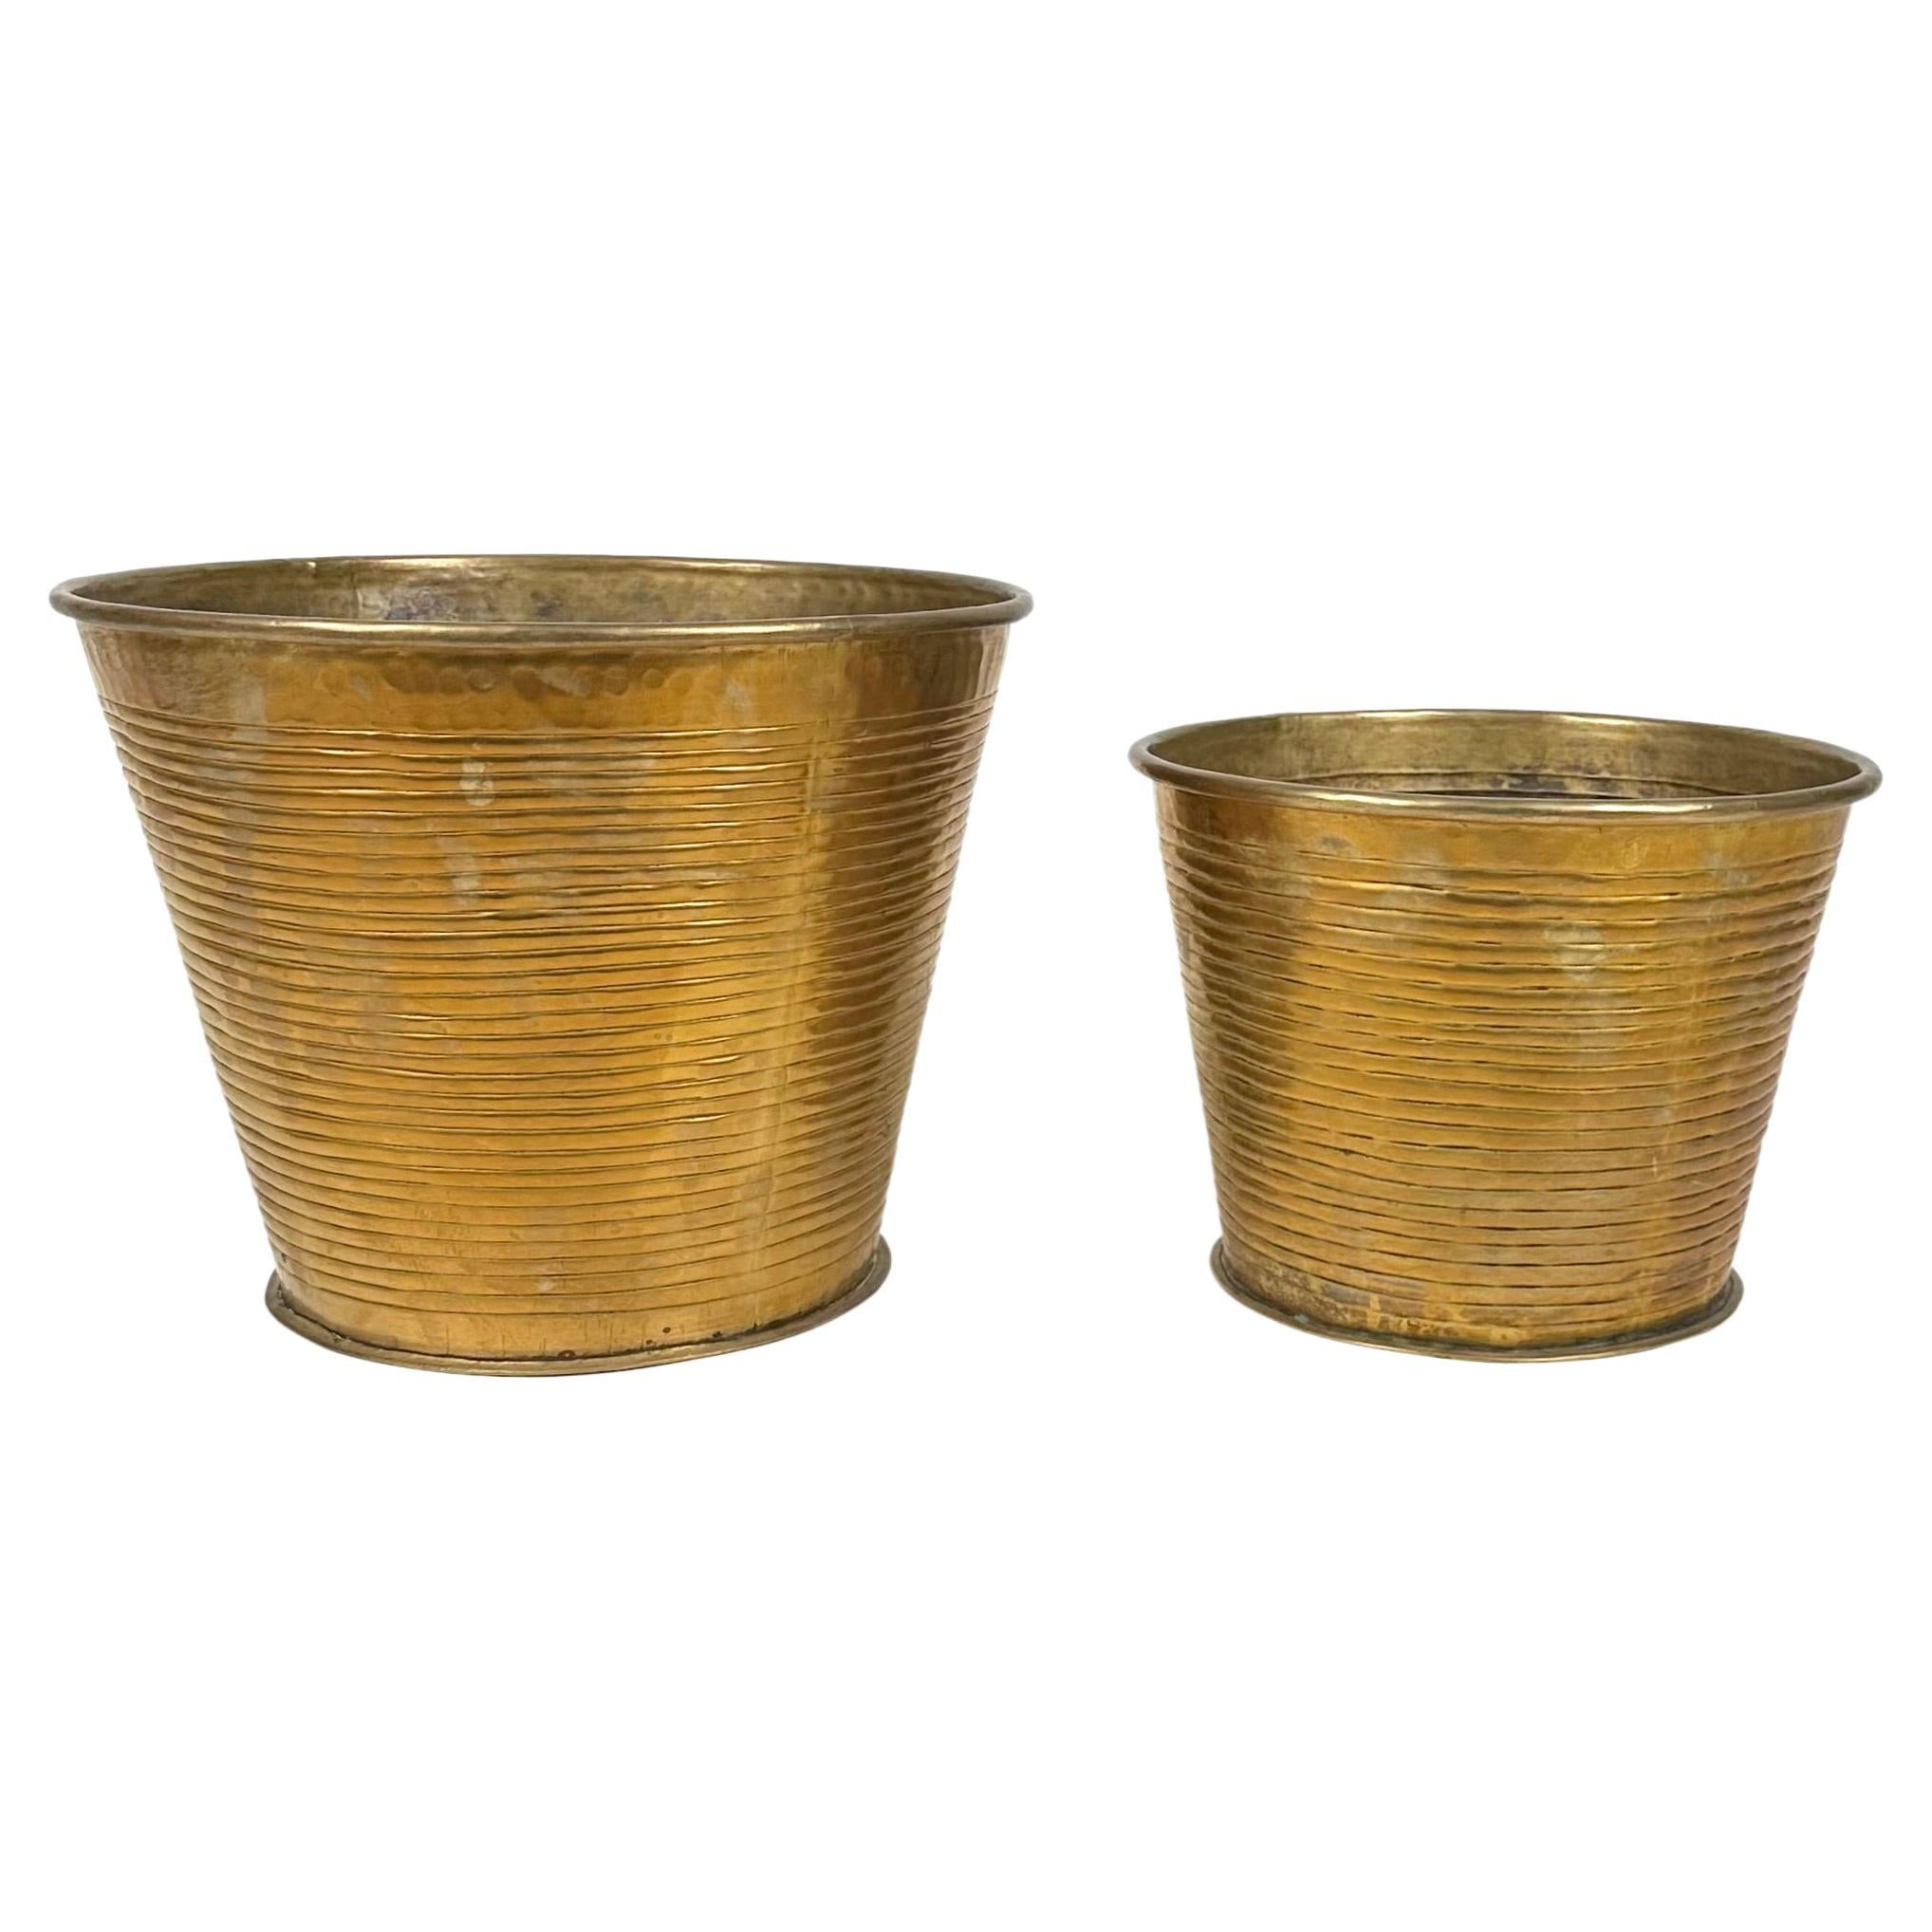 Midcentury Pair of Waste Paper Basket in Brass, Italy, 1950s